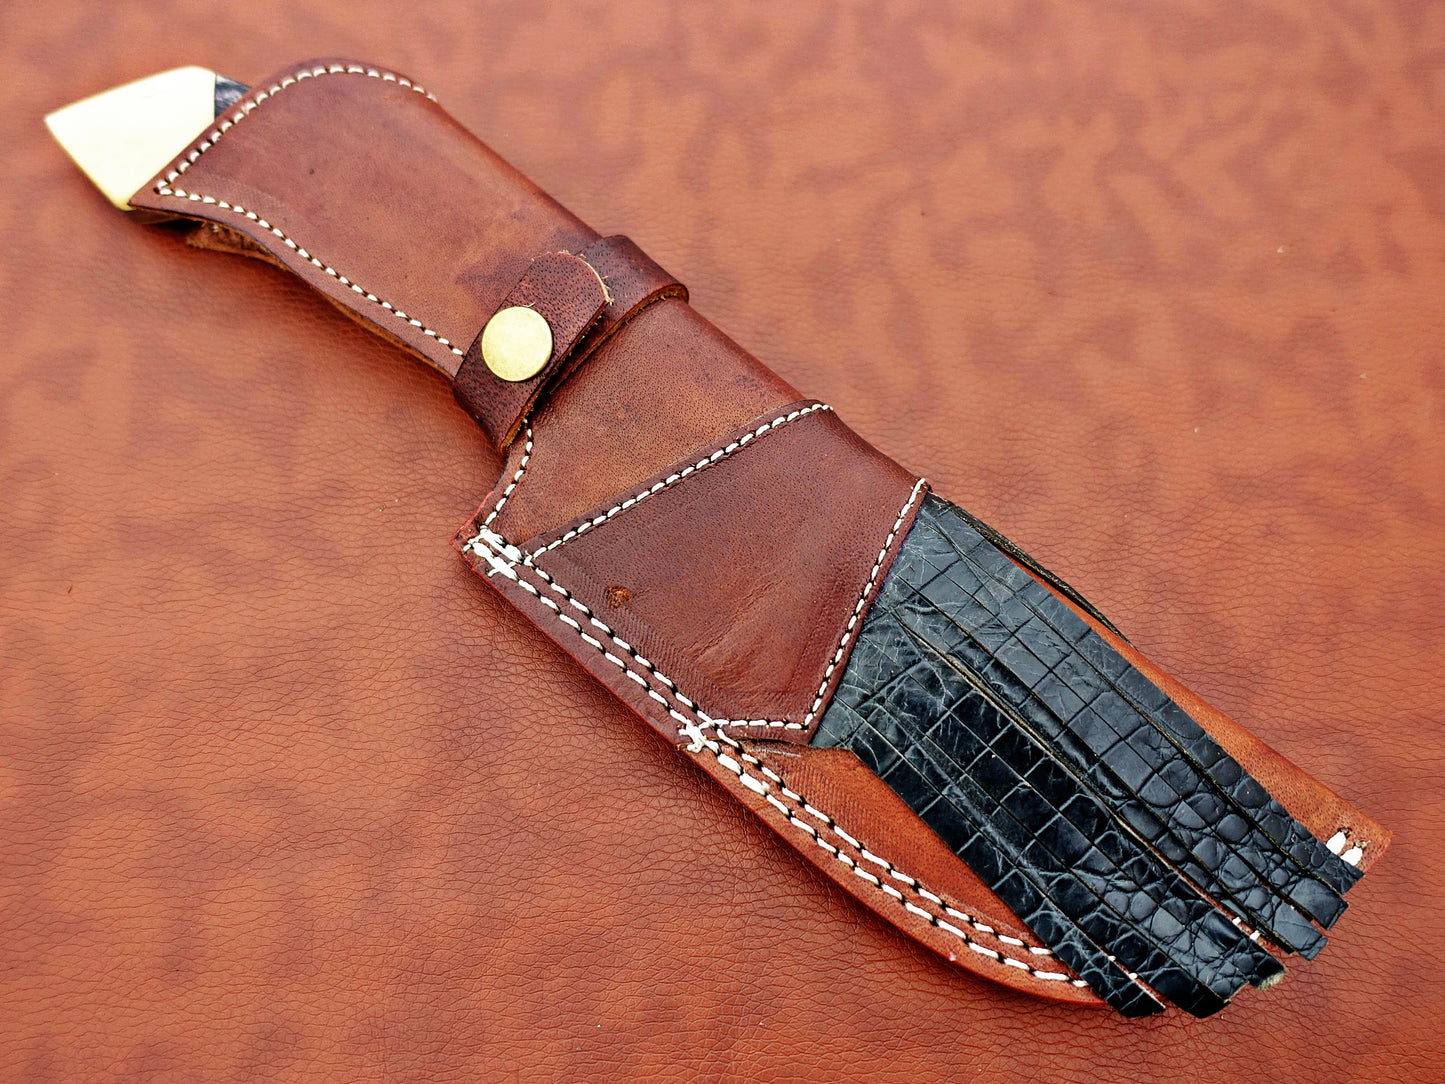 12" Long hand forged twist pattern full tang Damascus steel tracker knife, 2 tone dollar wood scale with Camel bone Bolster & pomel, Cow leather sheath